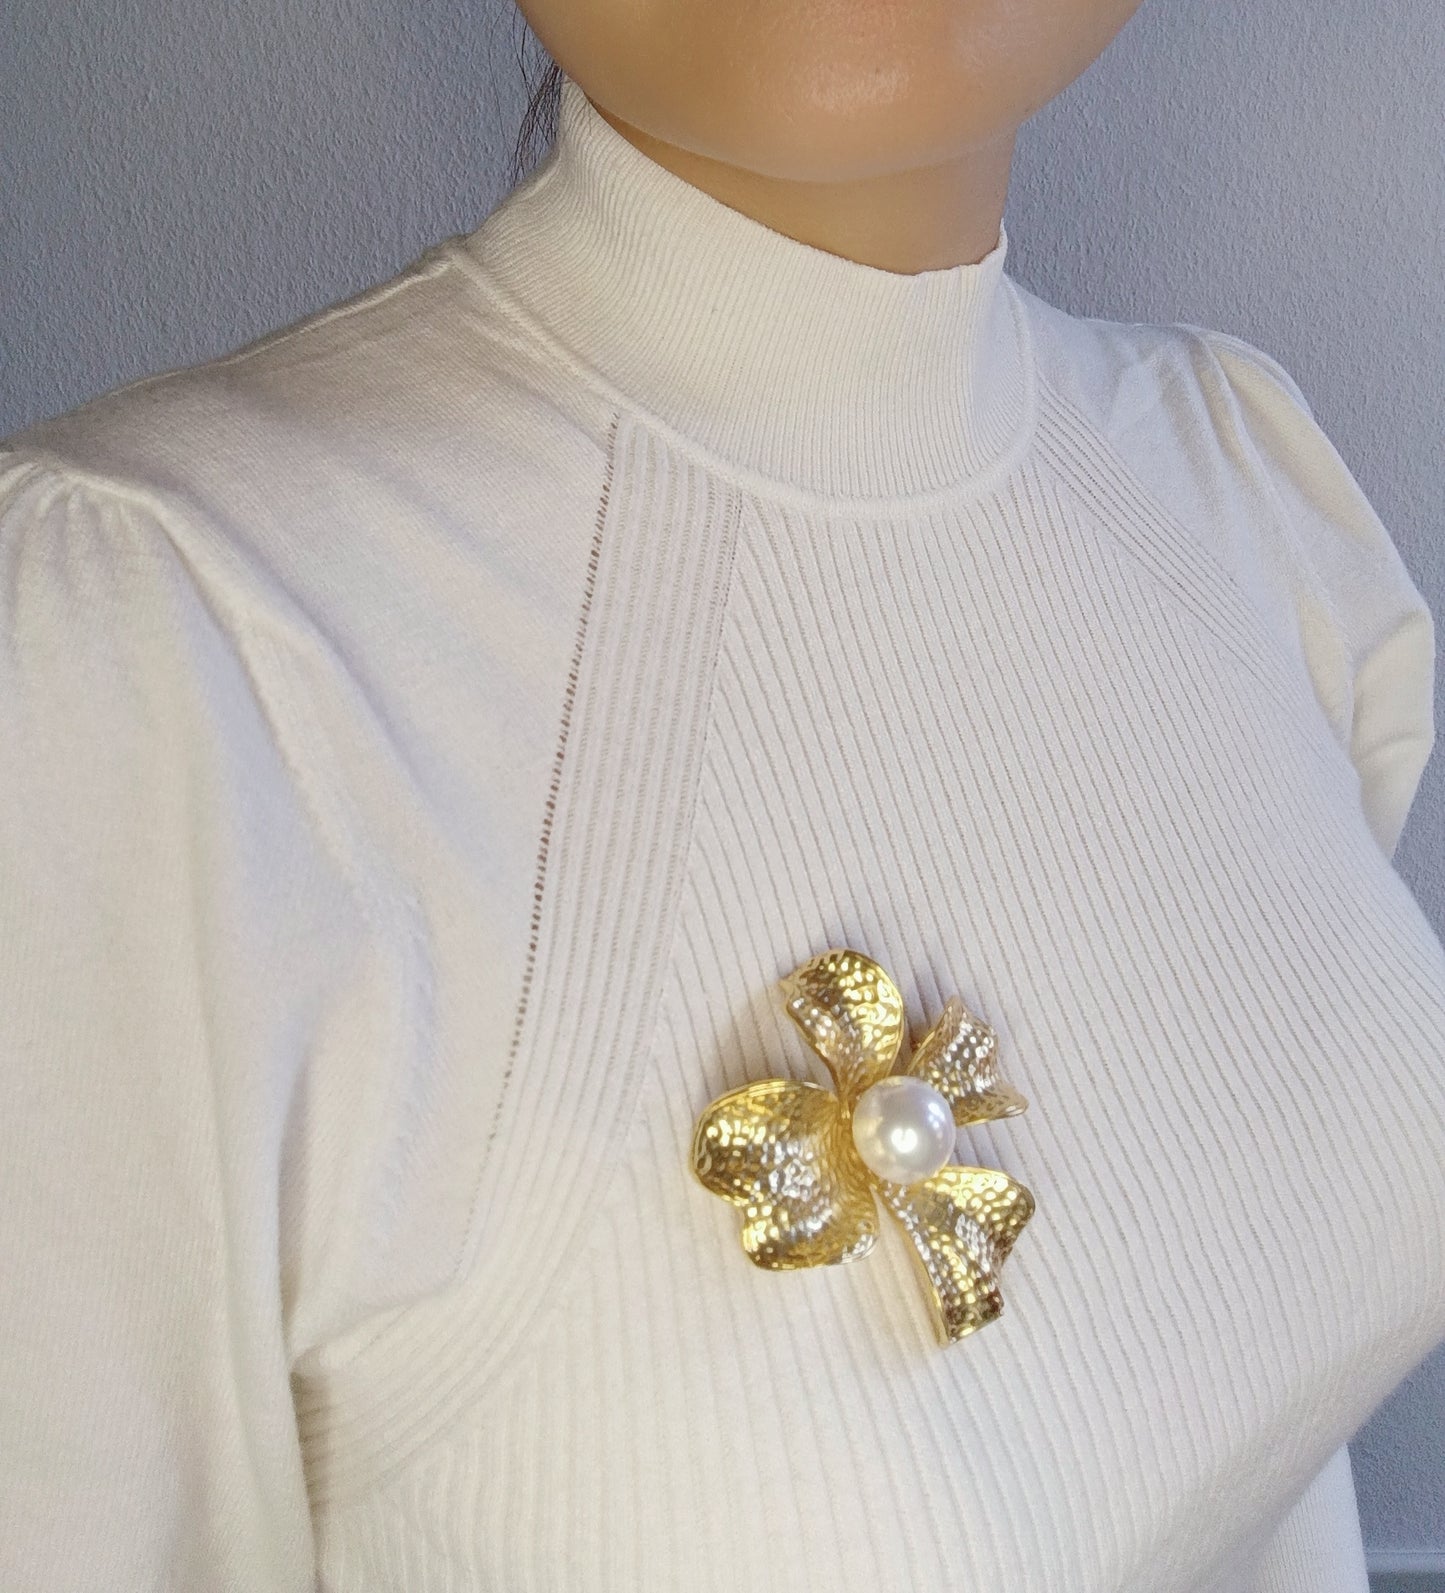 Brooch "Bloom" - Gorgeous collection